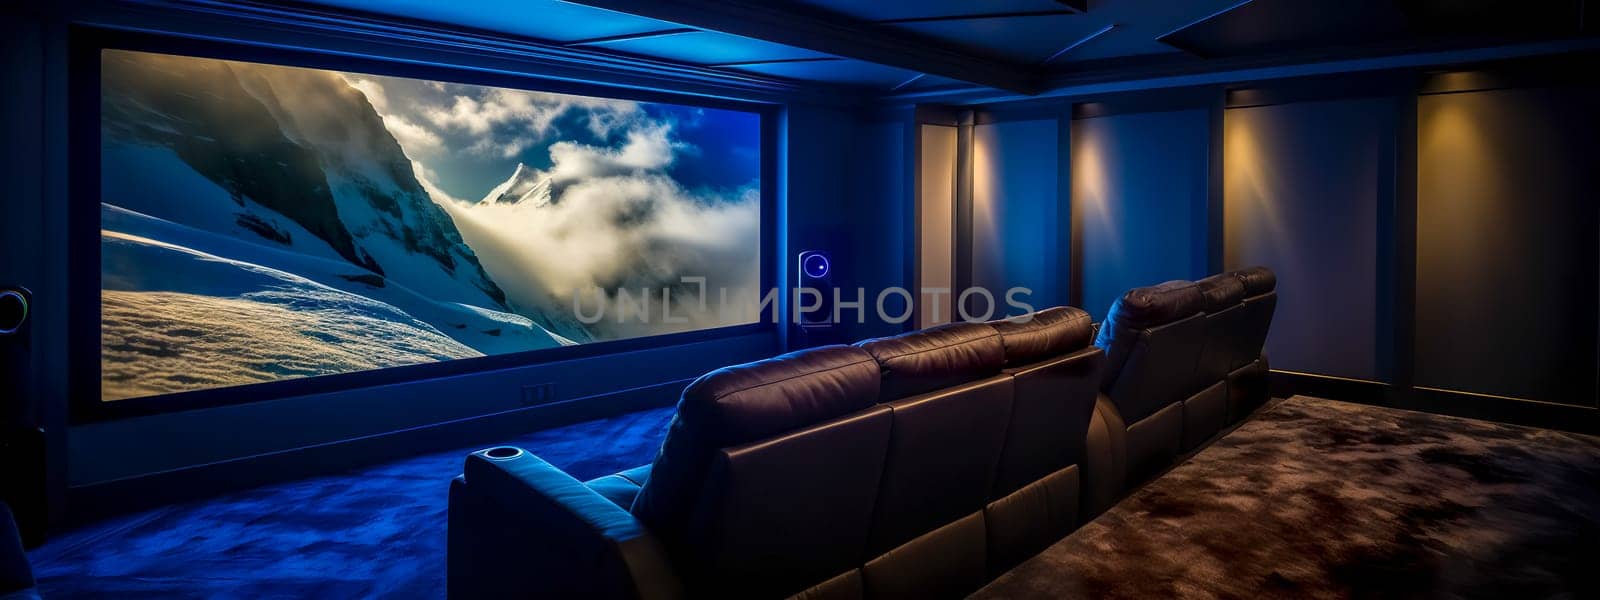 home theater setup with plush leather seating, ambient lighting, and a large projection screen displaying a captivating mountain scene, designed for an immersive viewing experience in a smart home.